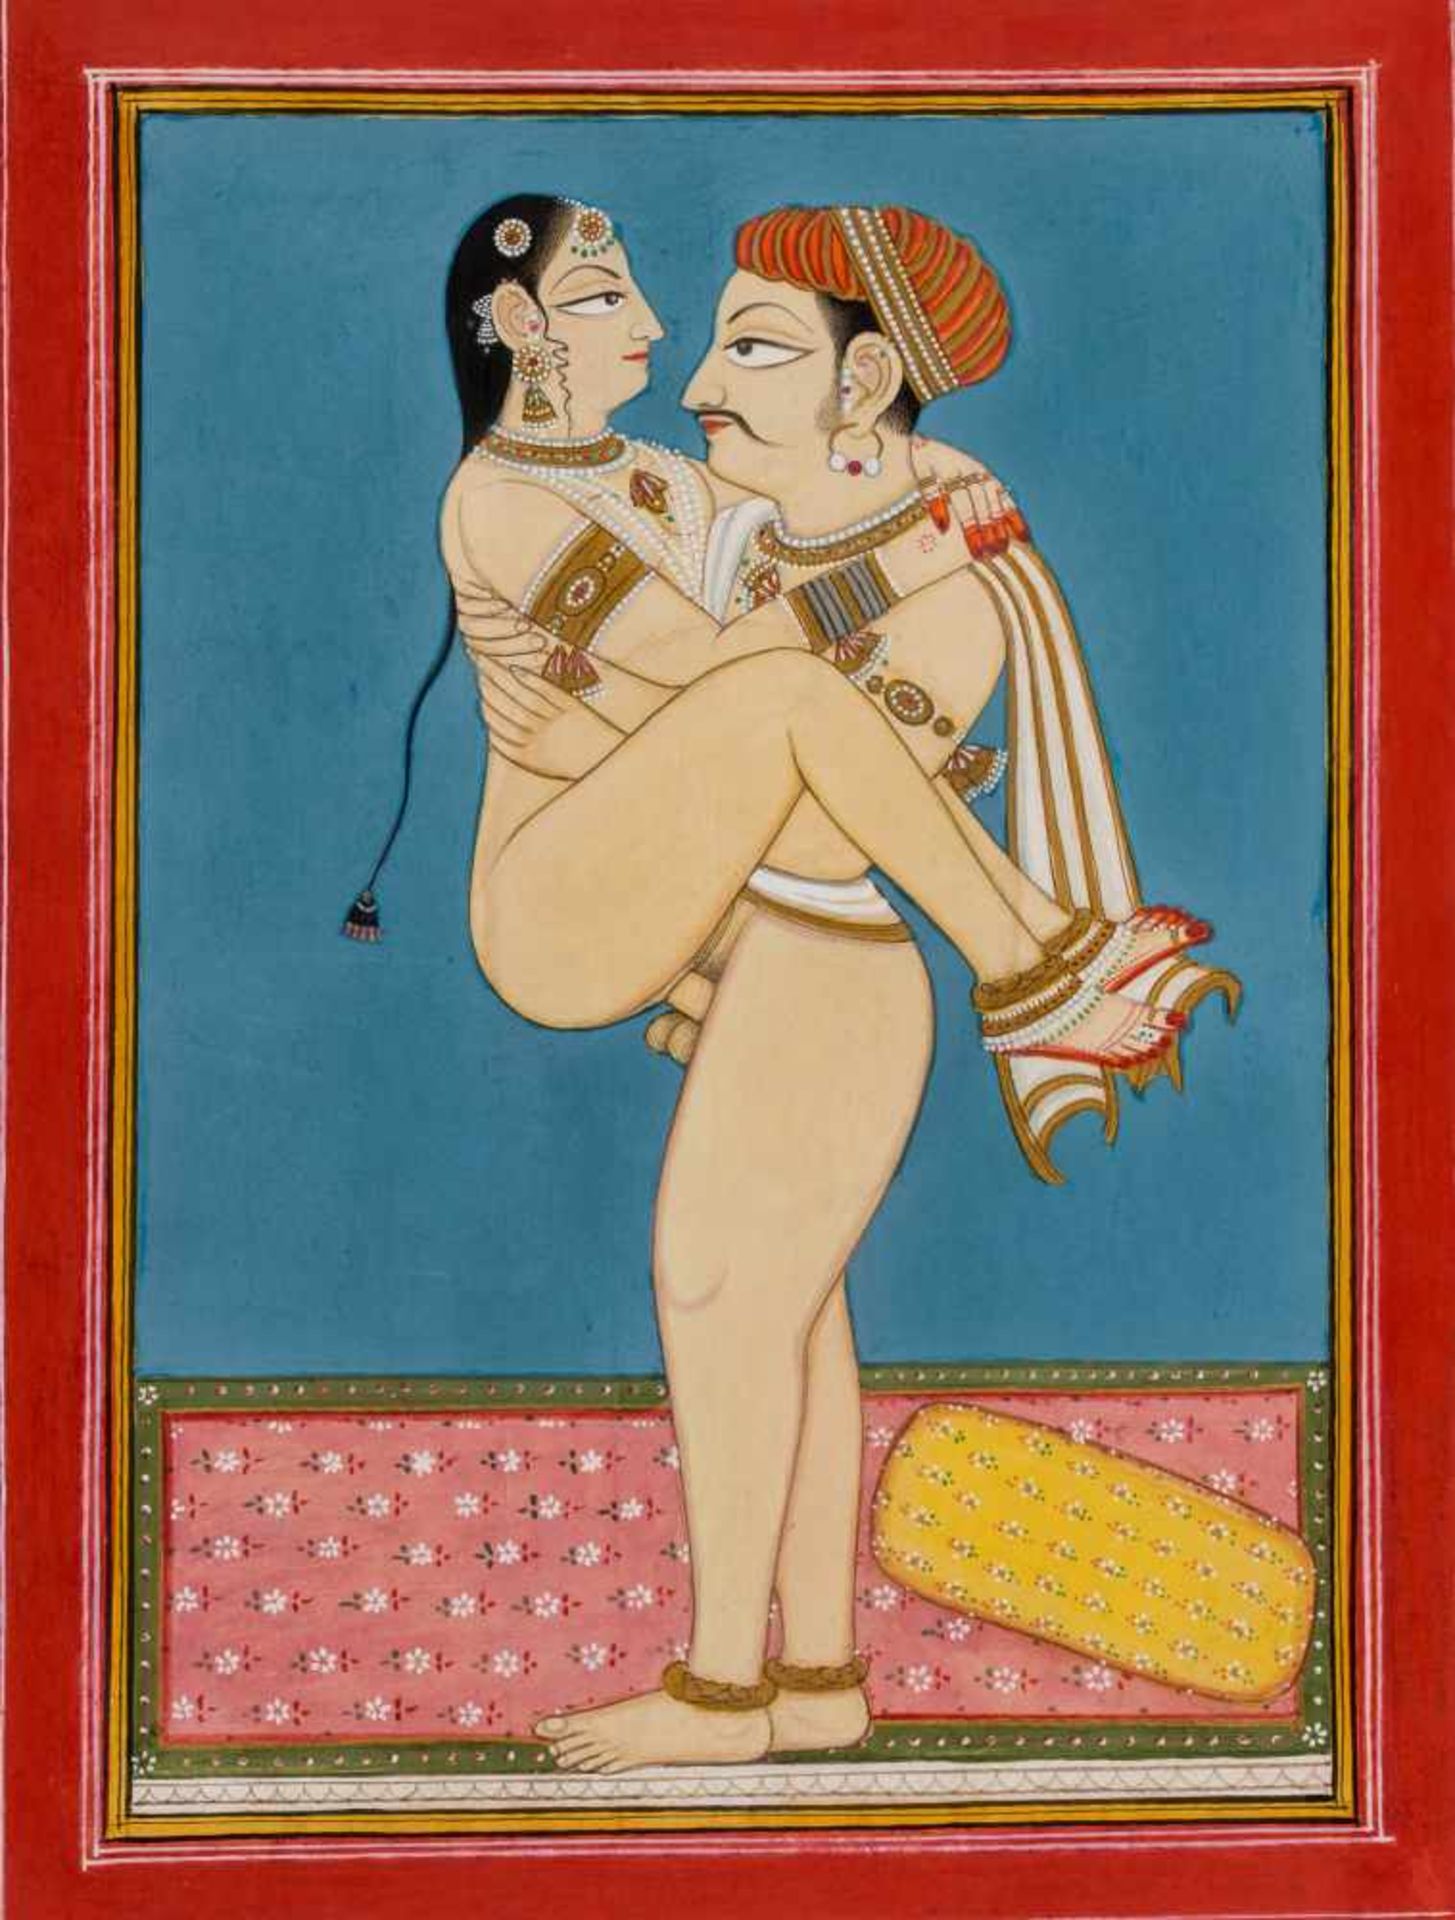 AN EROTIC INDIAN PAINTING - 19TH – EARLY 20th CENTURYGouache and gold paint on paper India, late